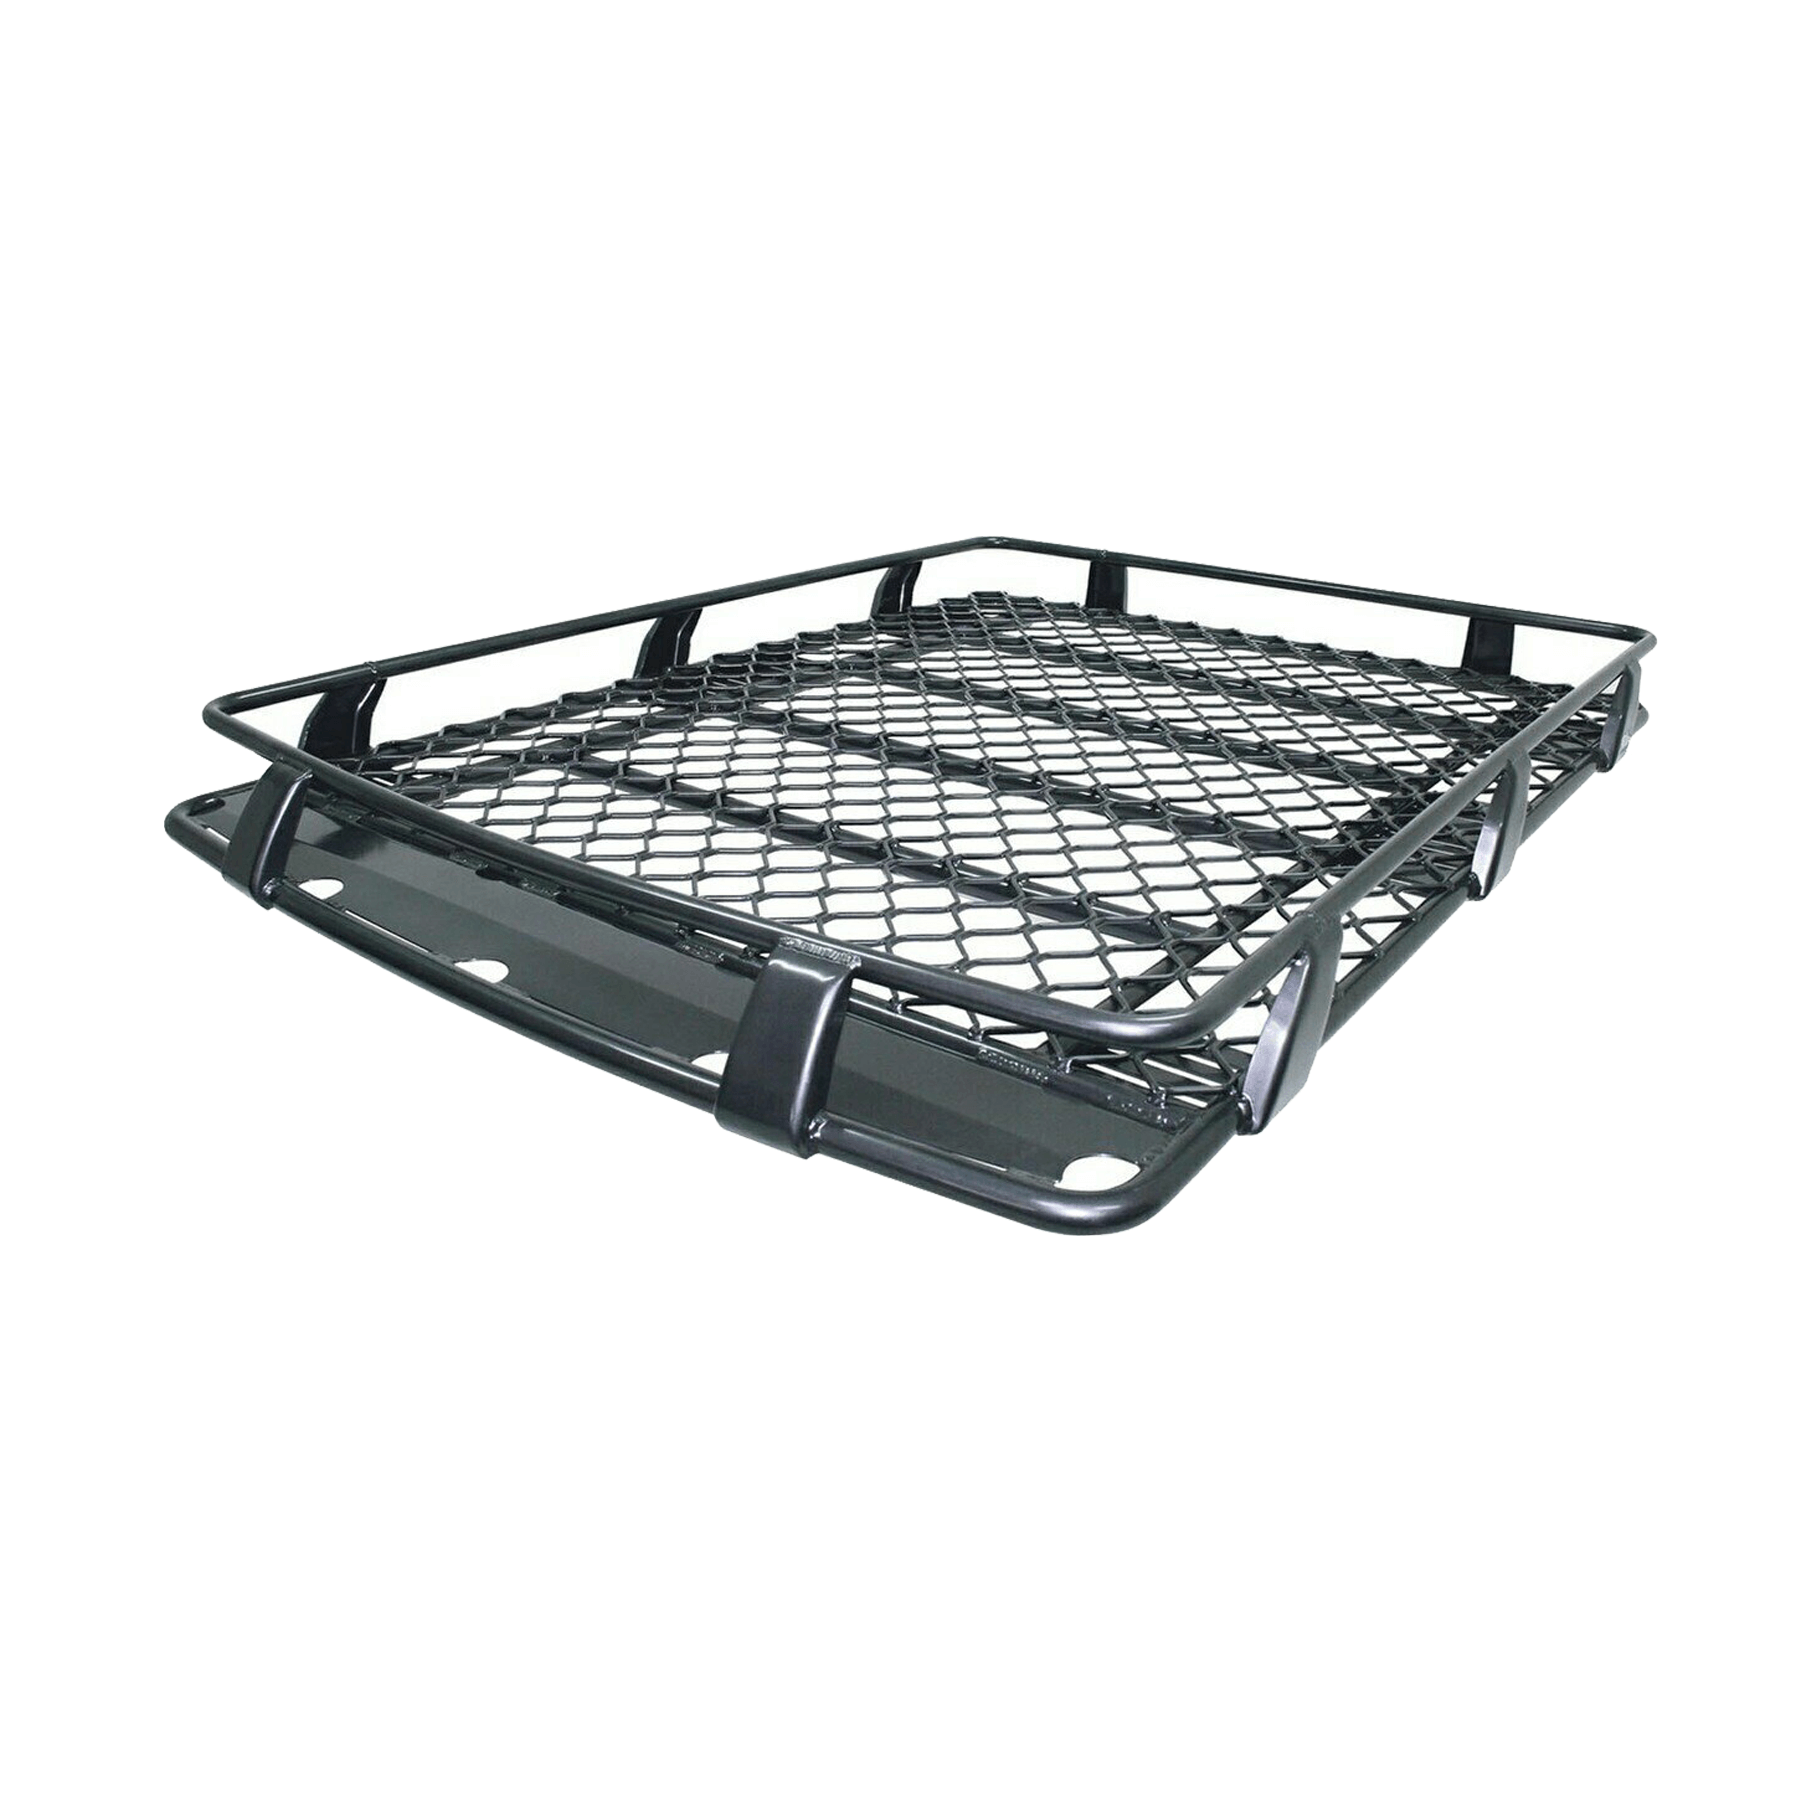 LANDCRUISER 78 SERIES 1999 TO 2007 BASKET ALLOY ROOF RACK – 2.2M X 1.25M (OPEN END)